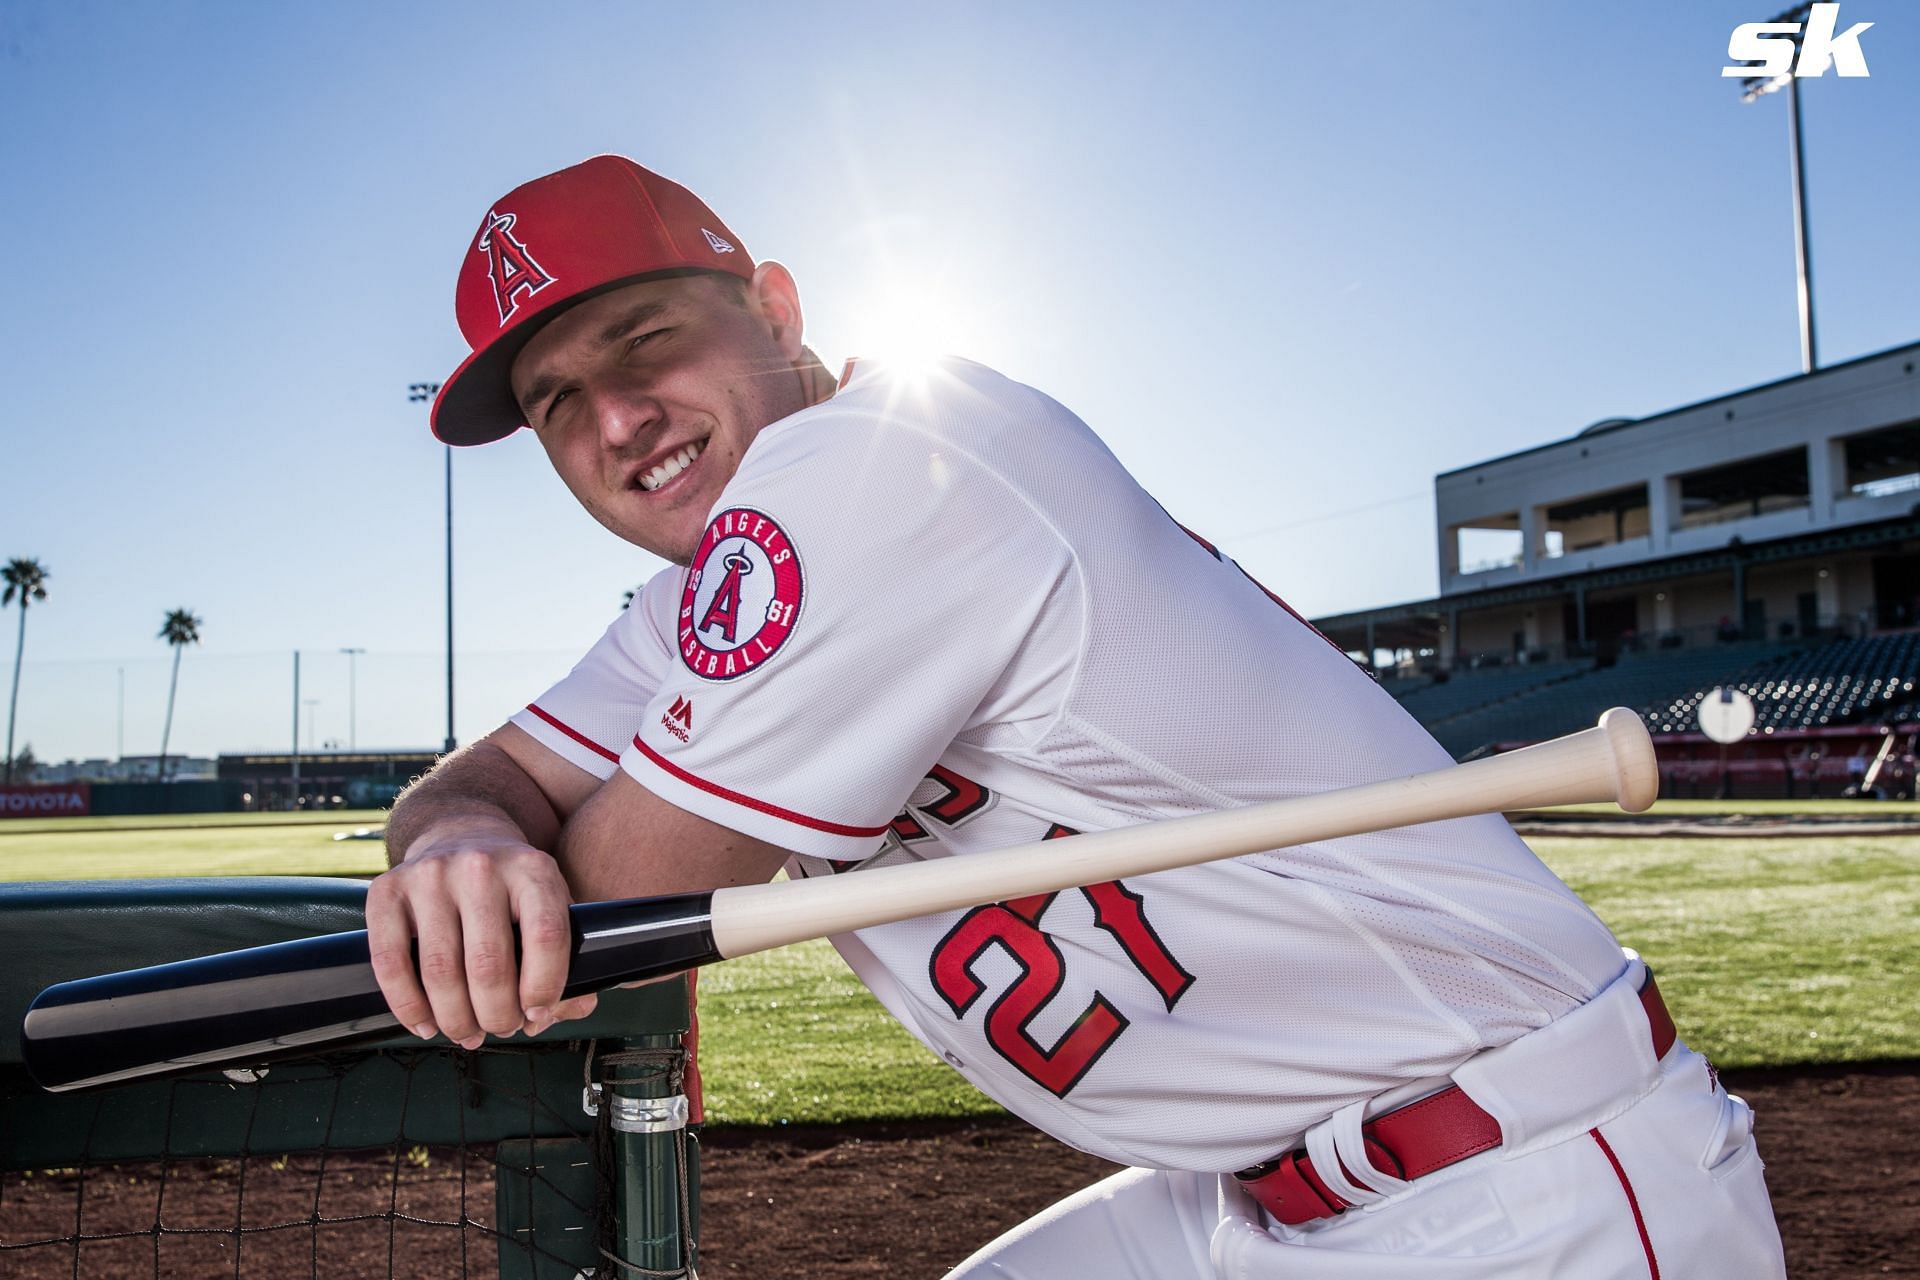 Damon Oppenheimer recalls the time when they lost Mike Trout to the Angels